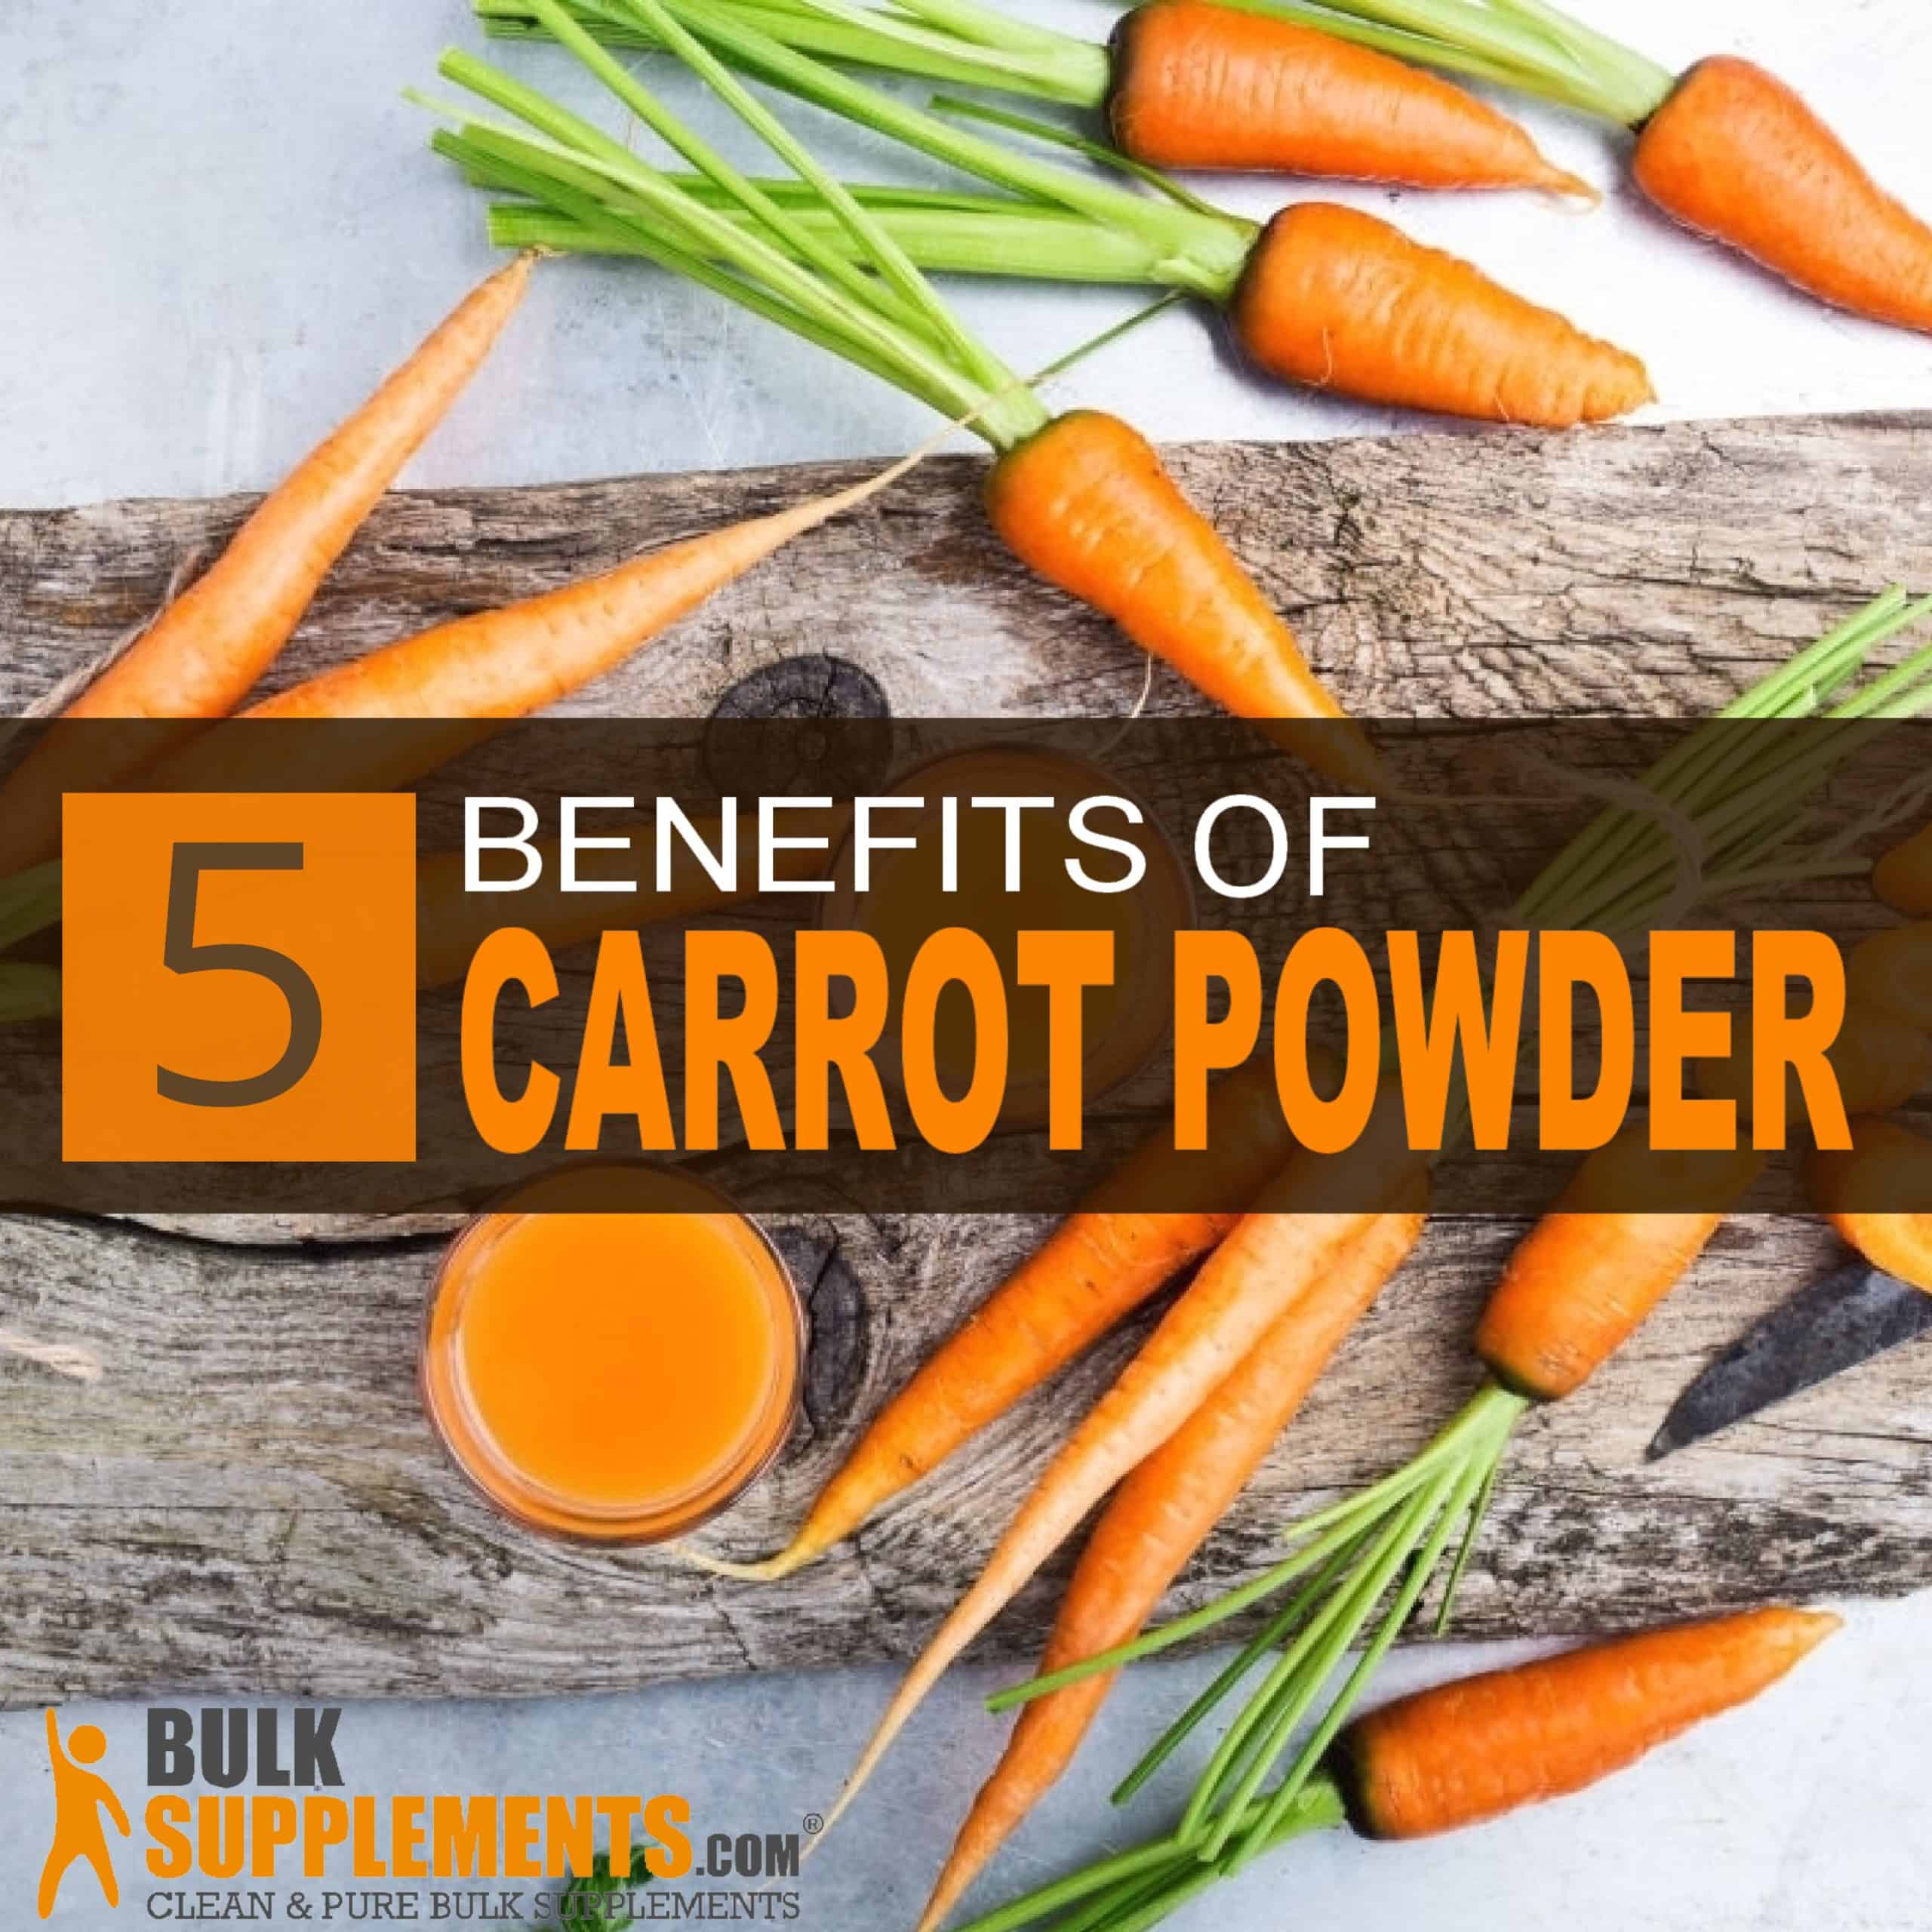 5 Benefits of Carrot Powder for your Skin, Eyes and Much More